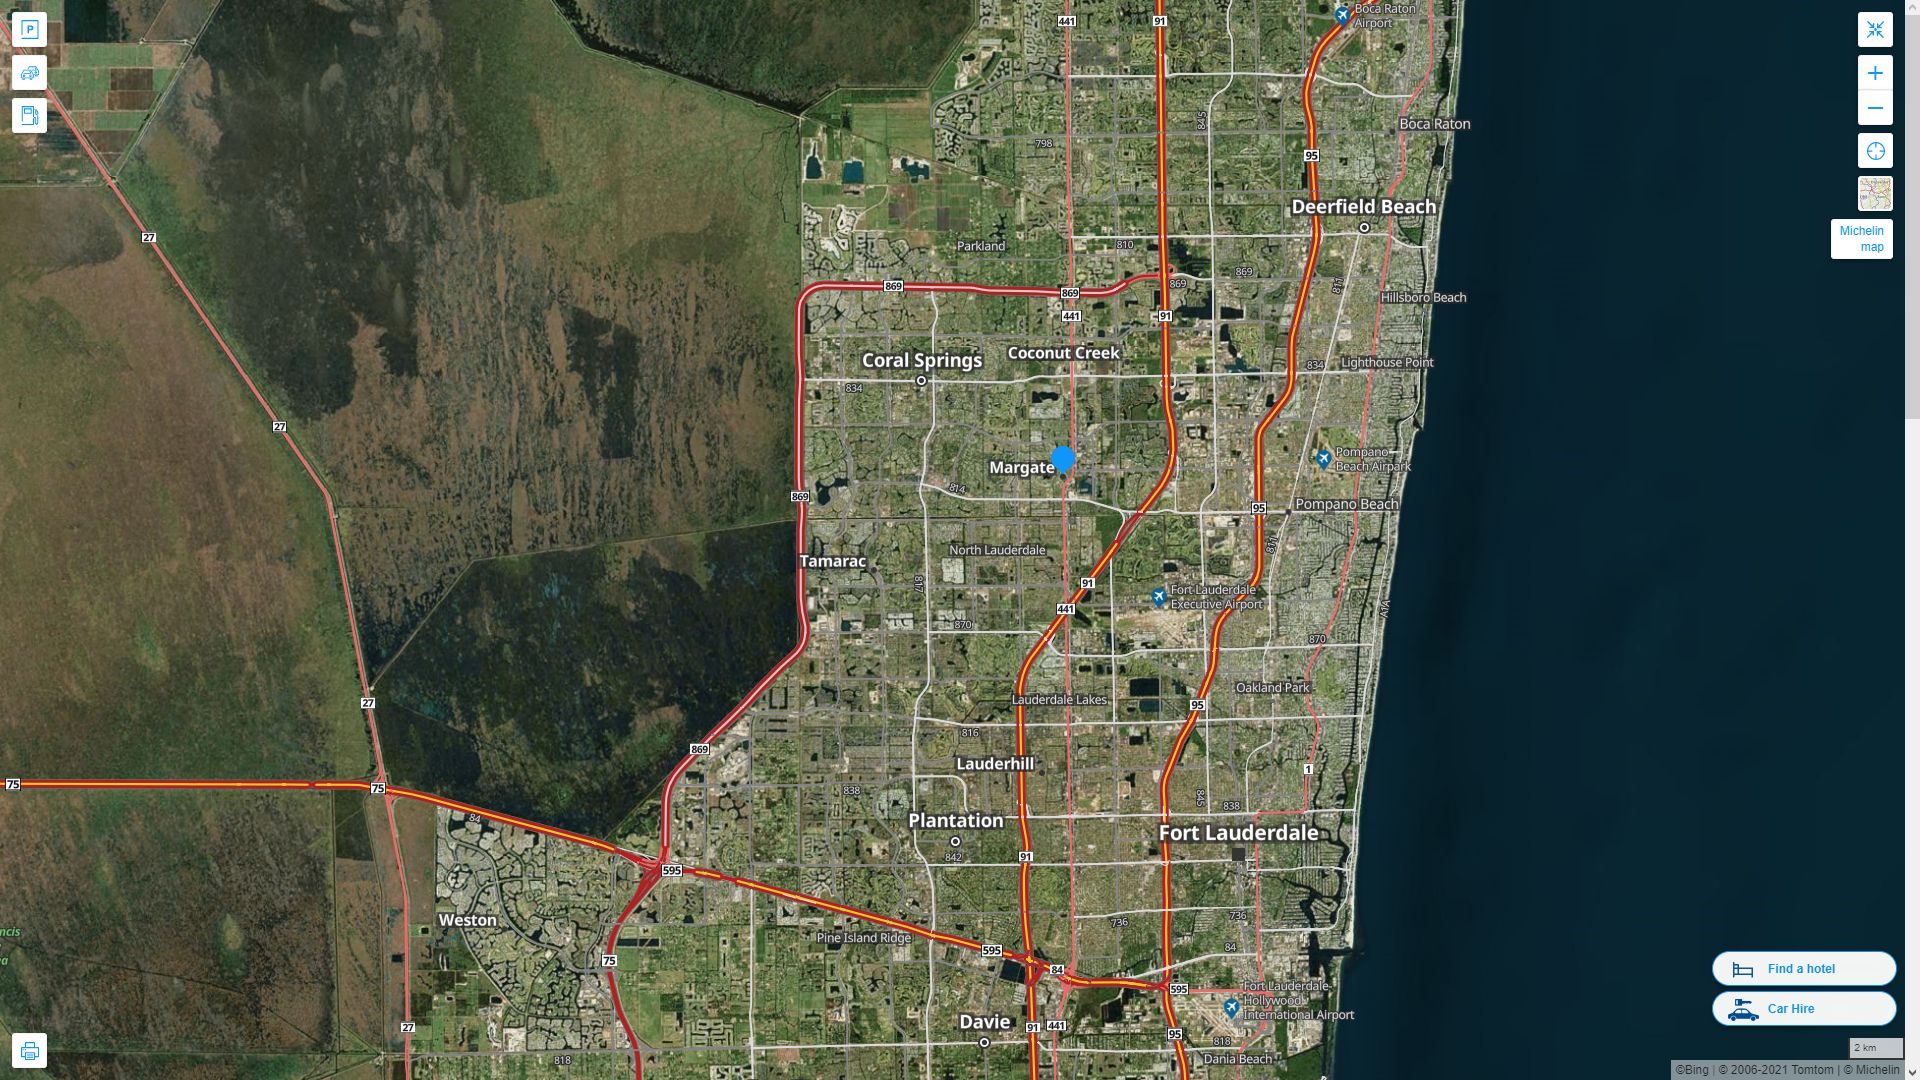 Margate Florida Highway and Road Map with Satellite View